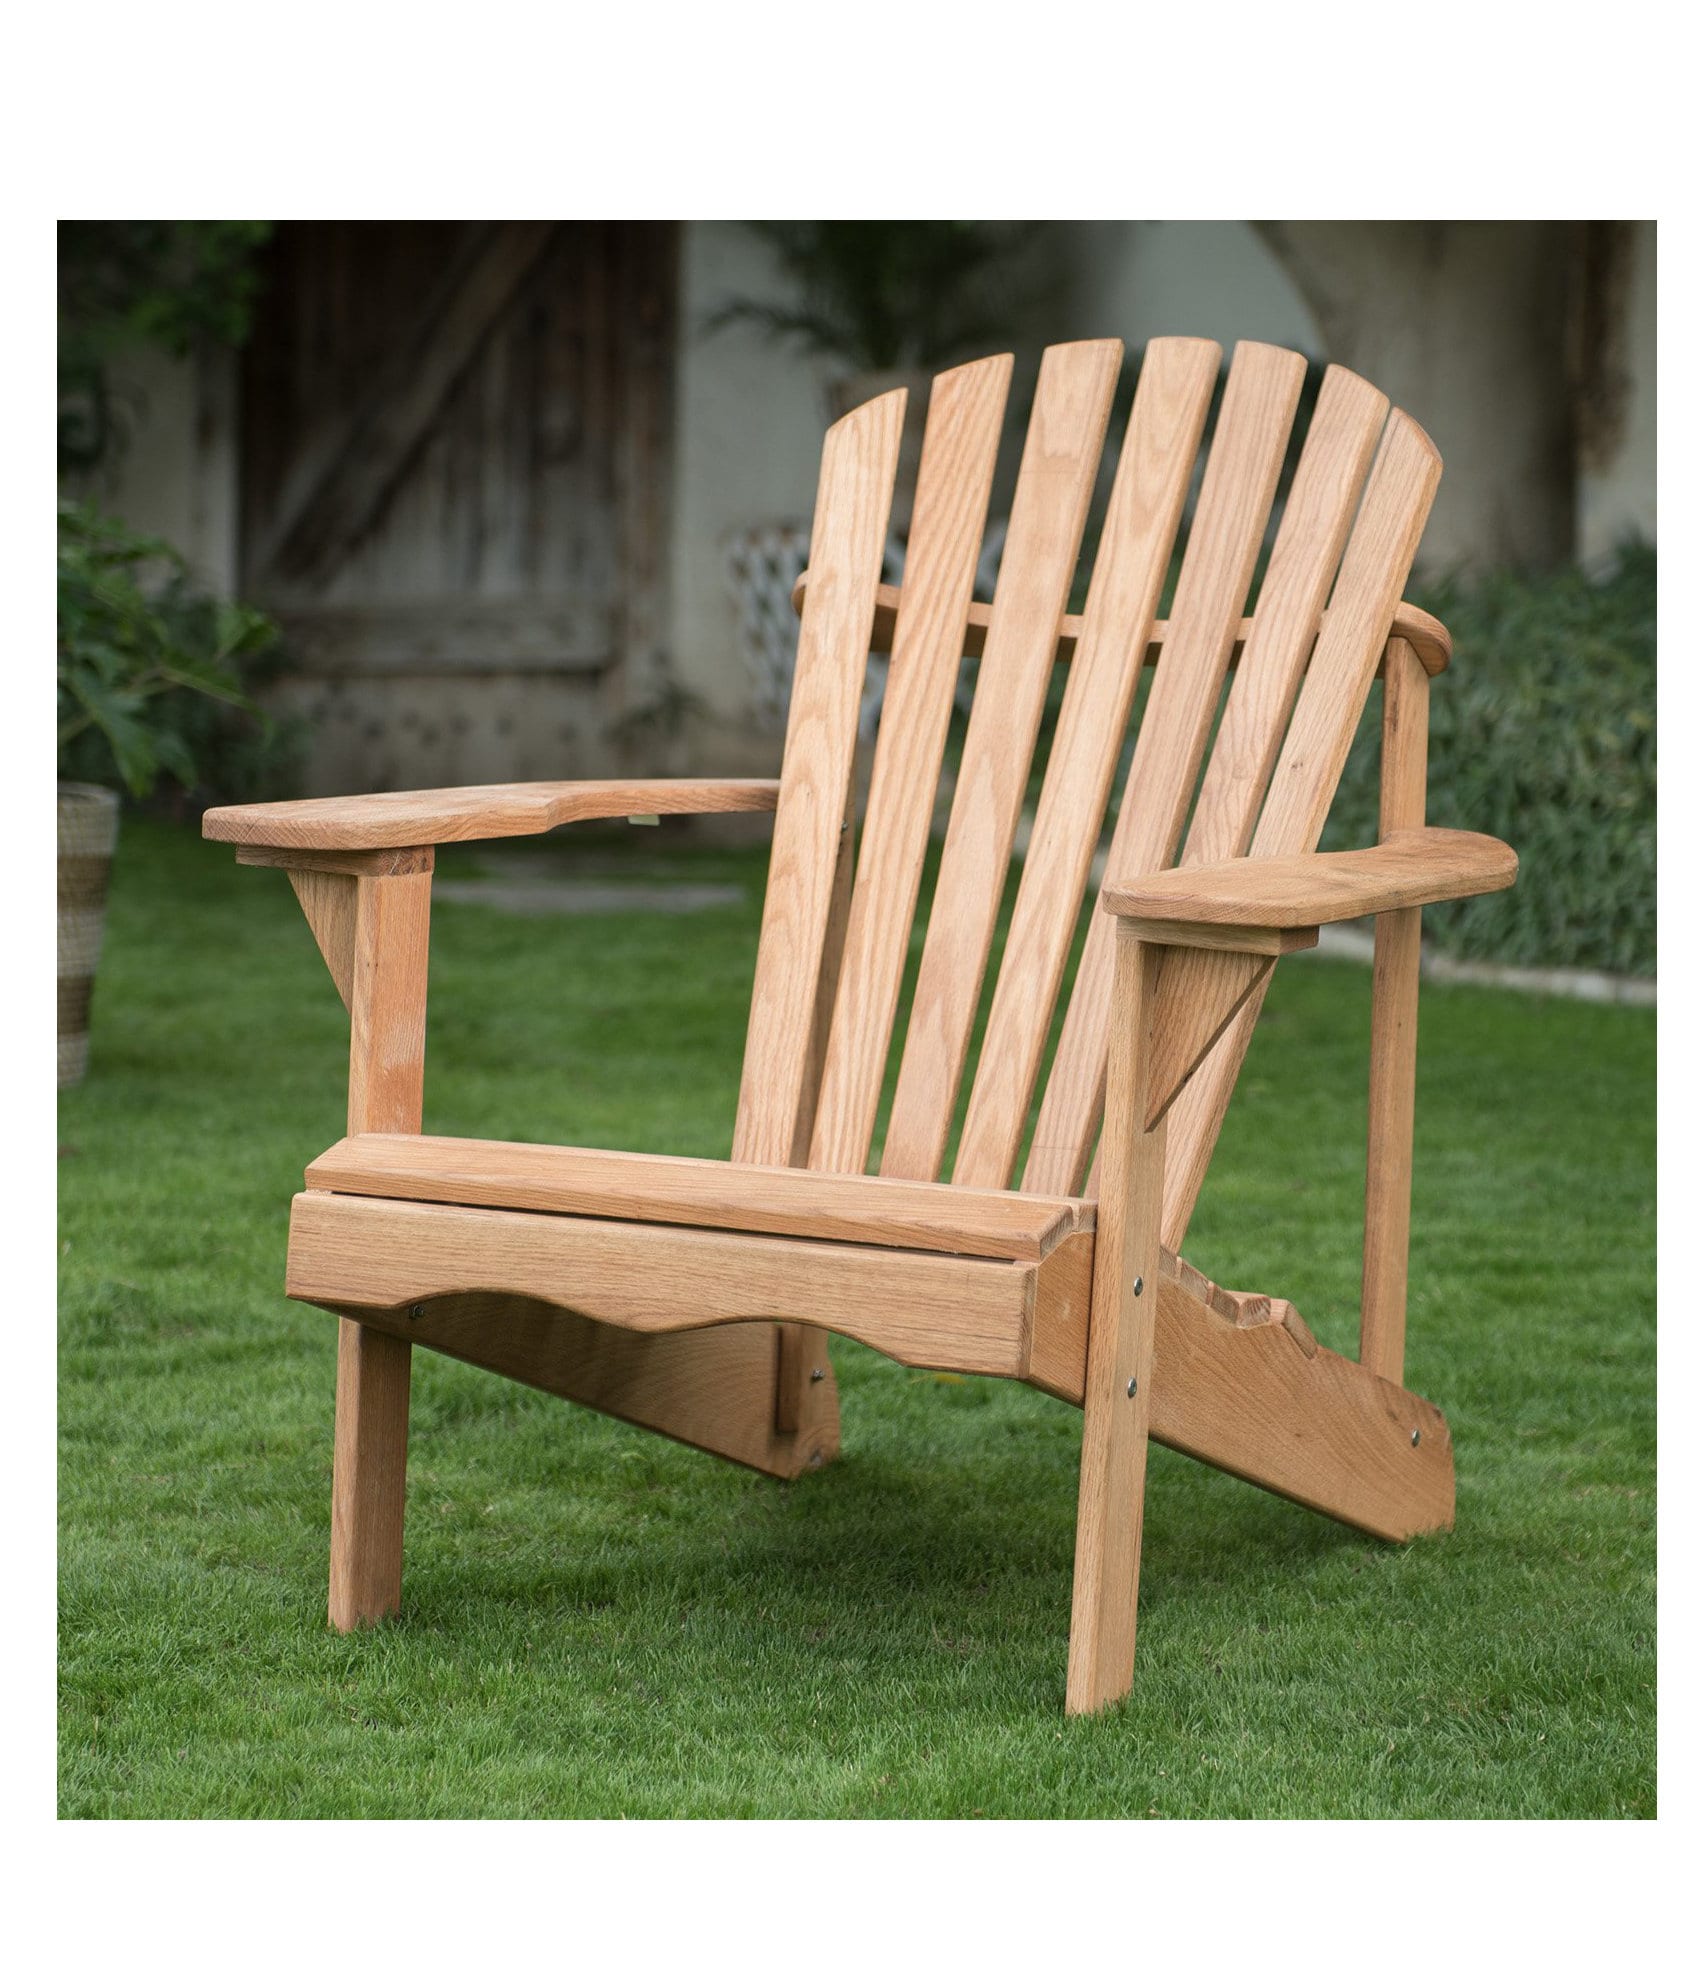 Step-by-Step Guide to Building Your Own Adirondack Chair插图3